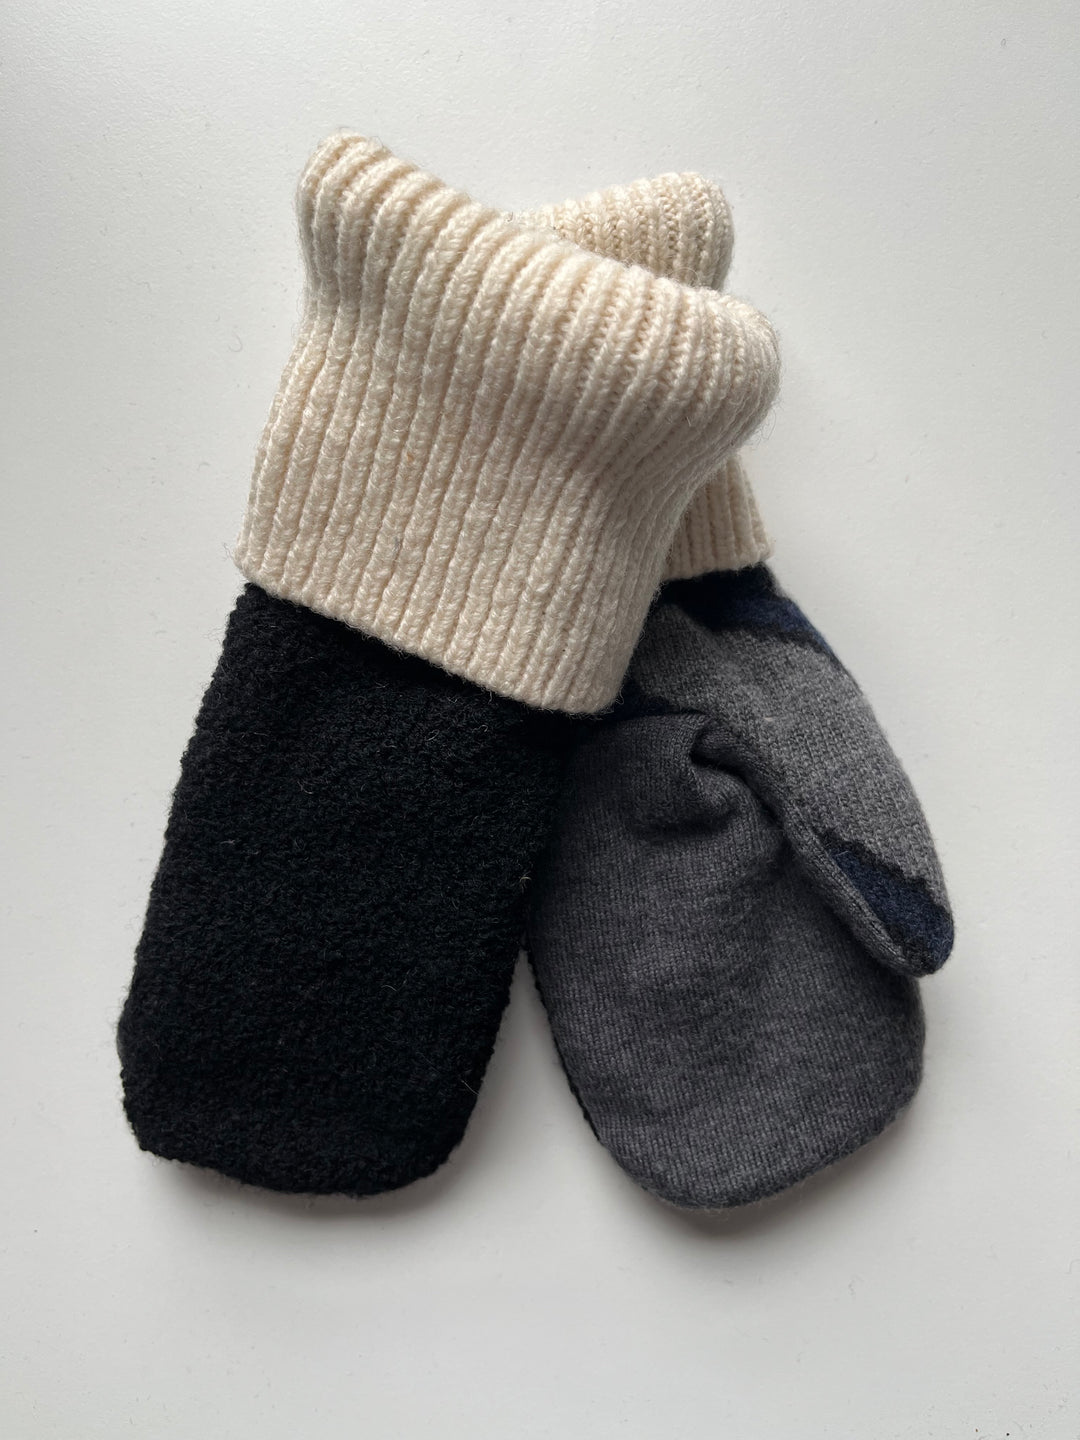 Black, grey, and cream mittens with blue pattern